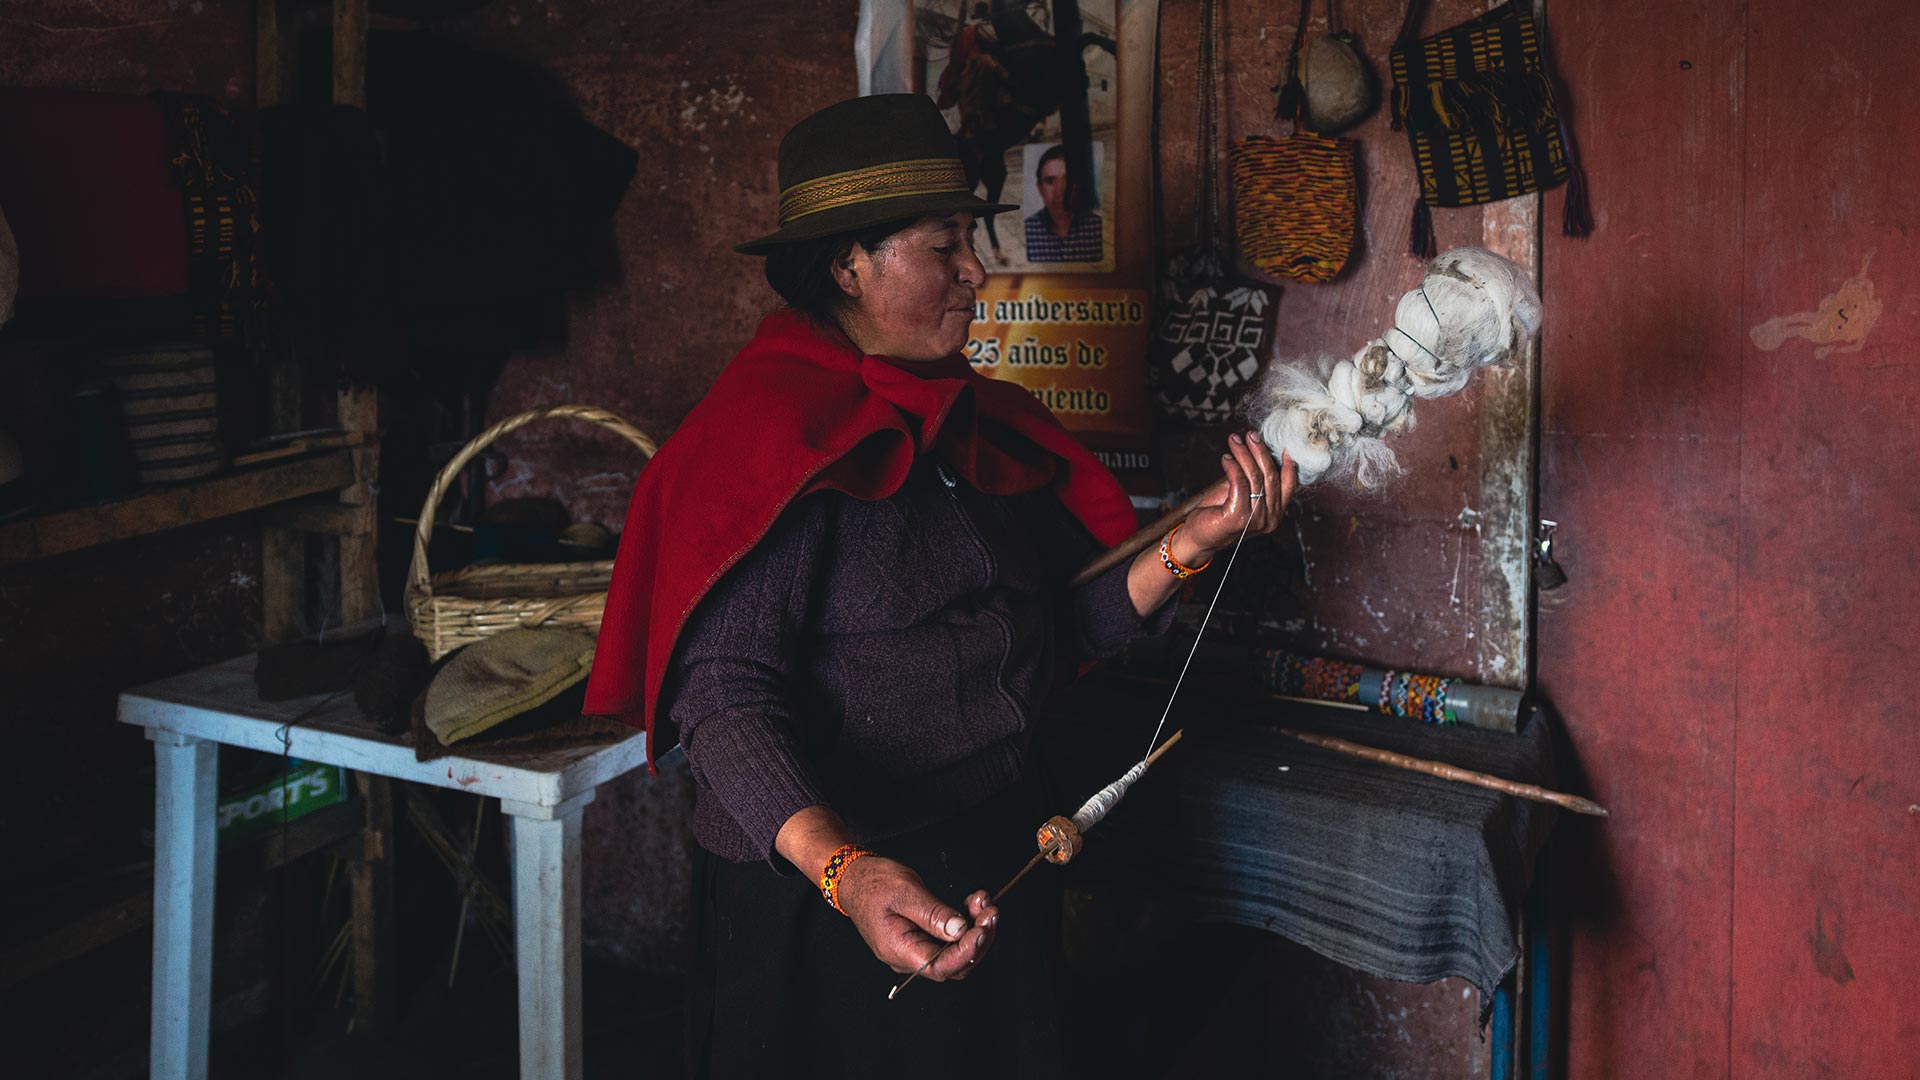 An indigenous Andean woman is yarning wool with a drop spindel near Guamote, Chimborazo, on one of the community visits from the Inti Sisa Guesthouse with Impactful Travel